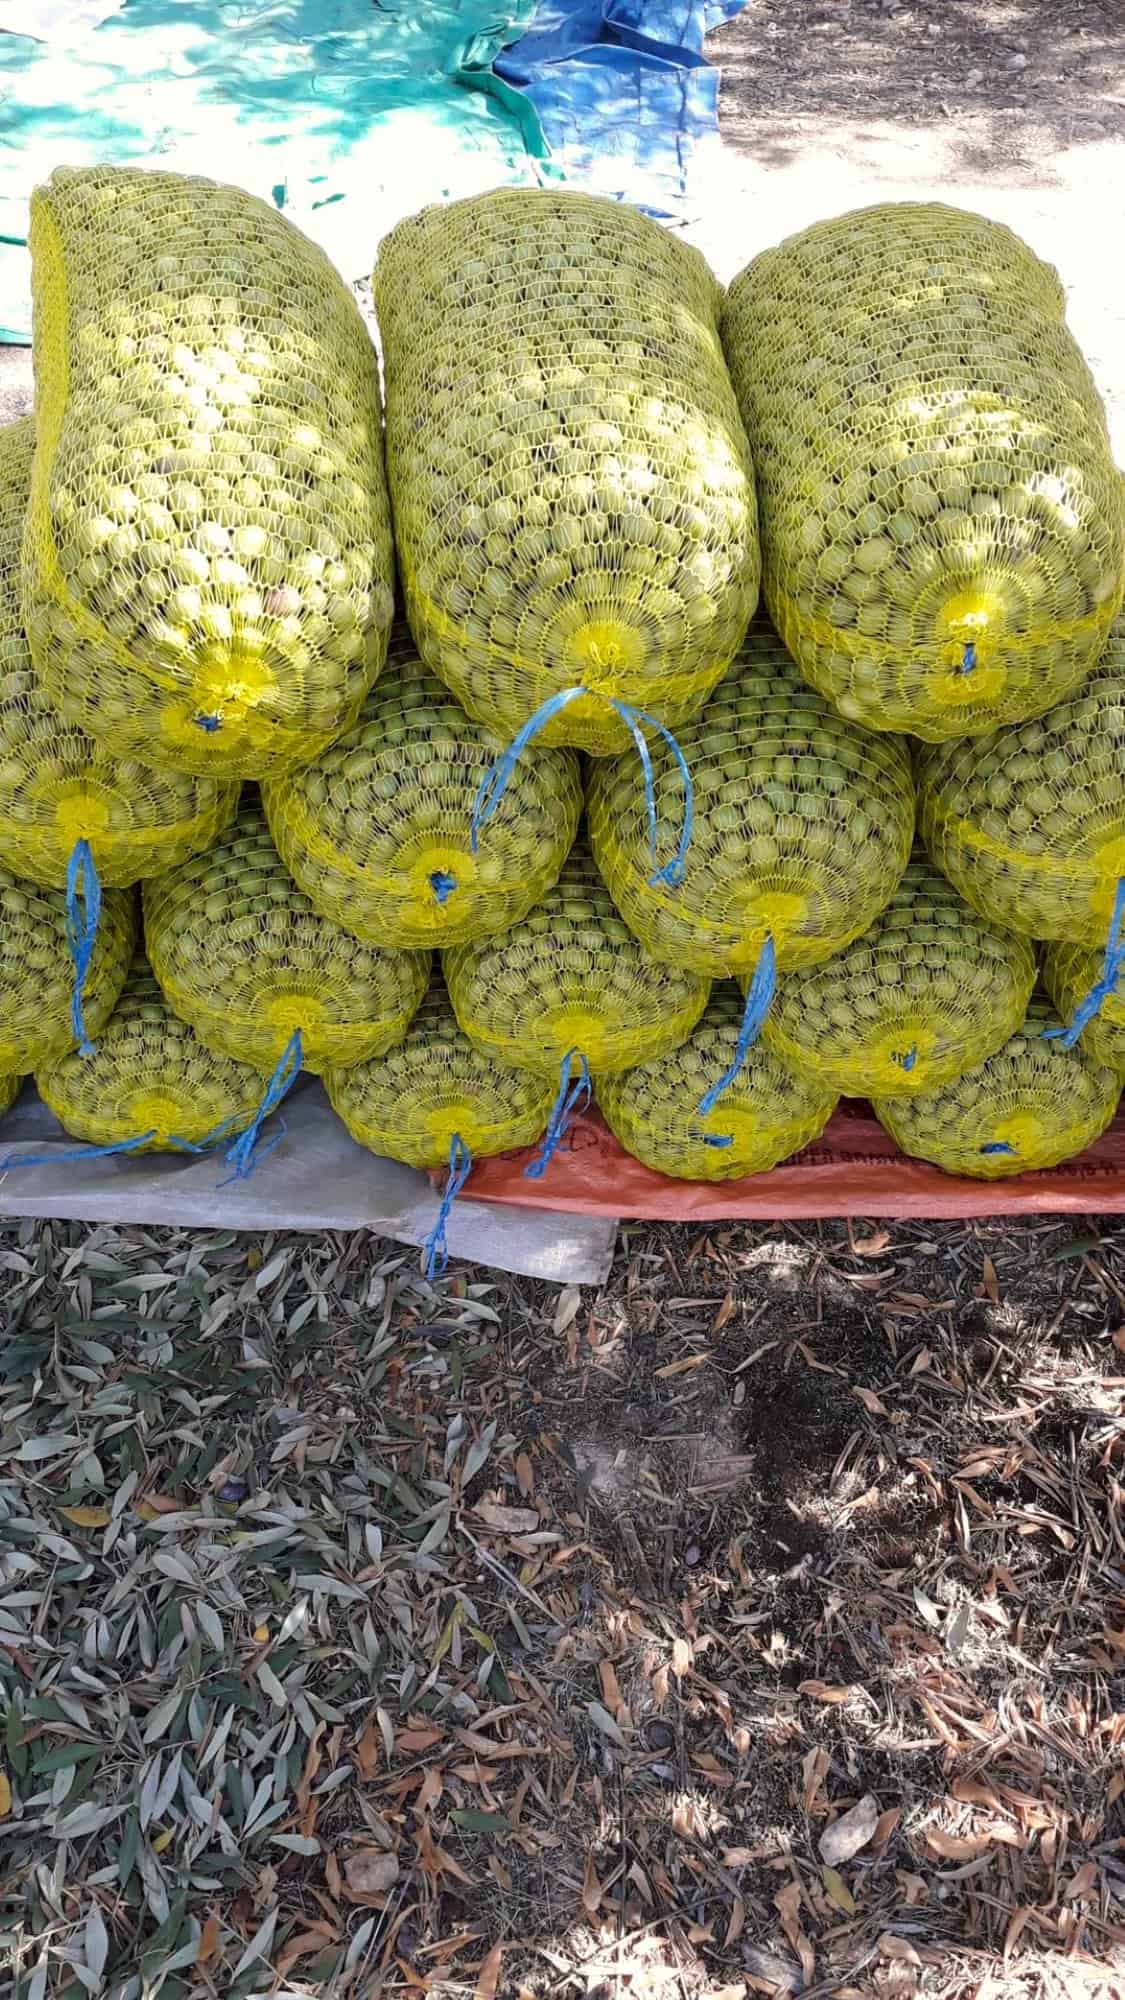 Fresh green olives in several bags on the ground.